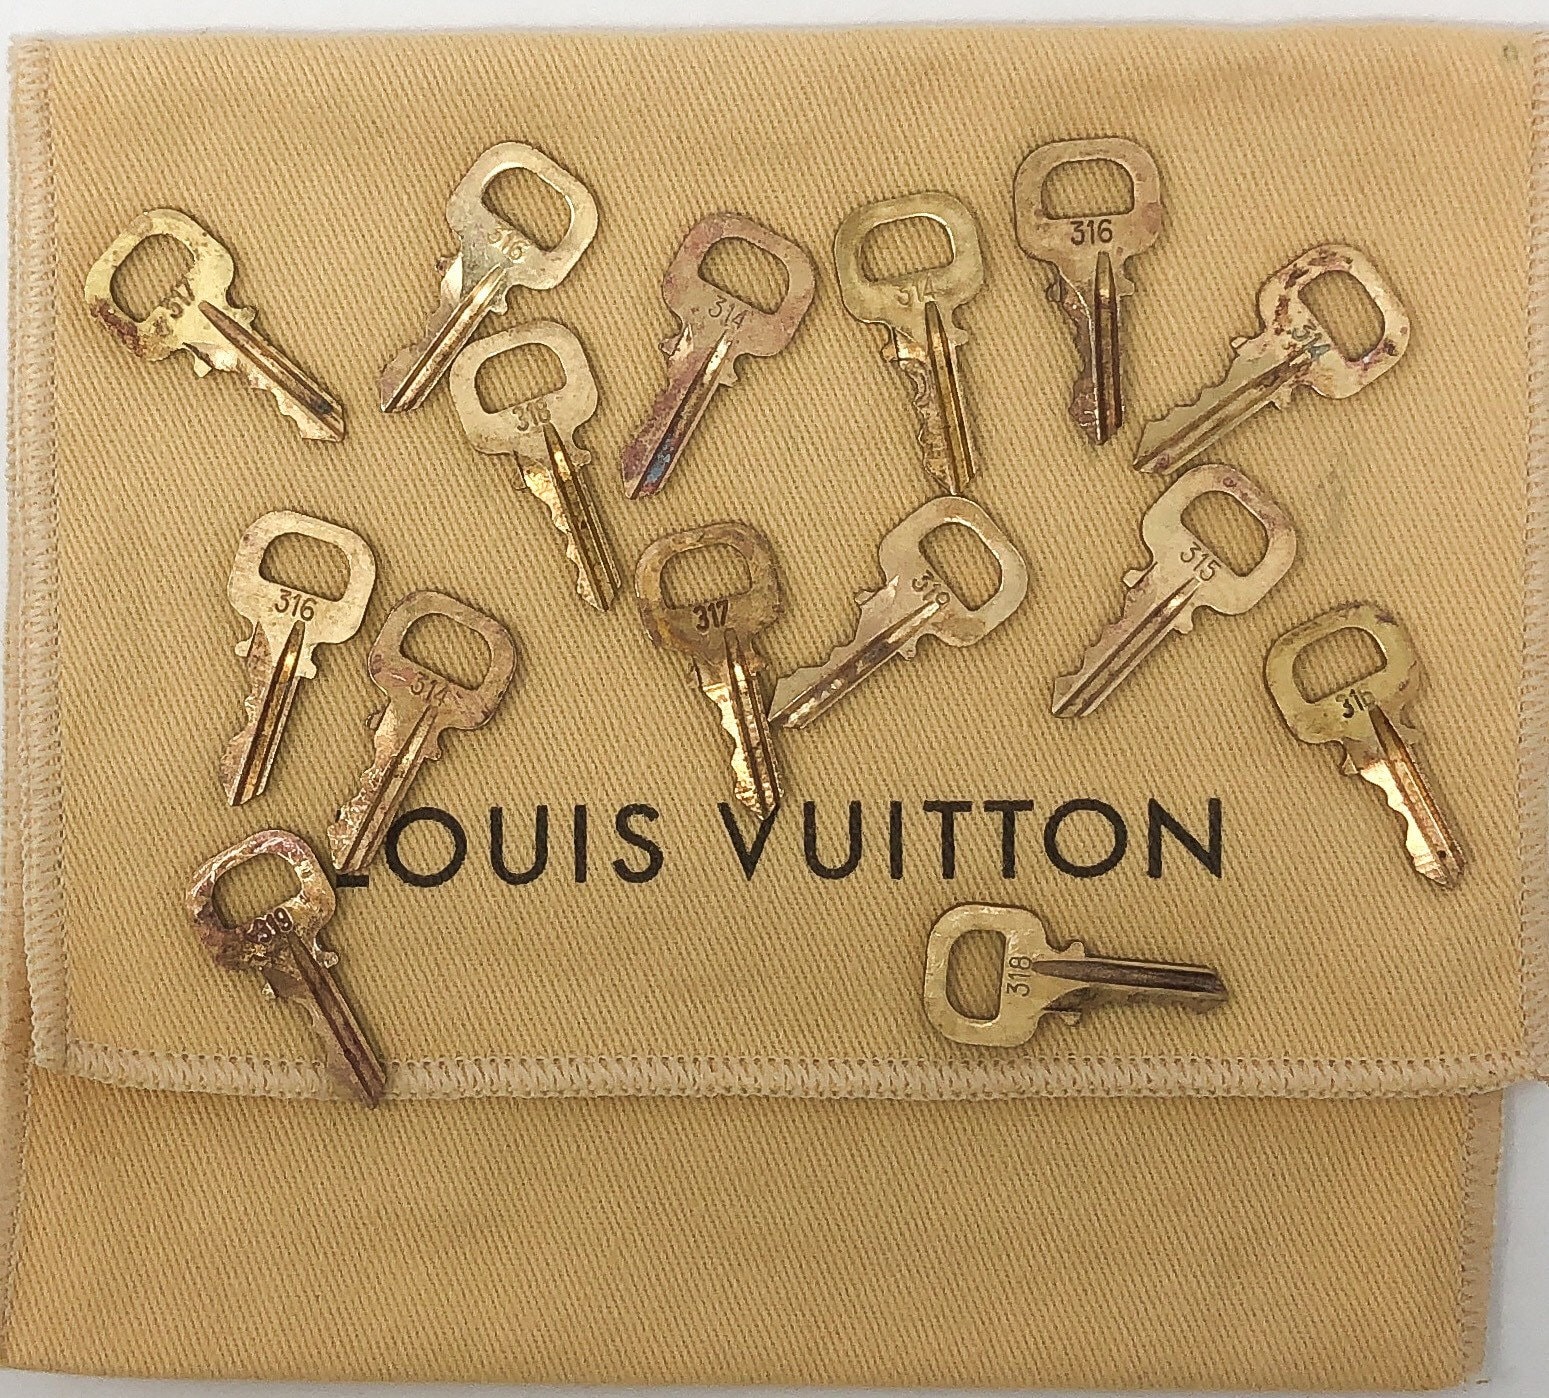 Louis Vuitton Lock And Key Replacement Czech Republic, SAVE 36